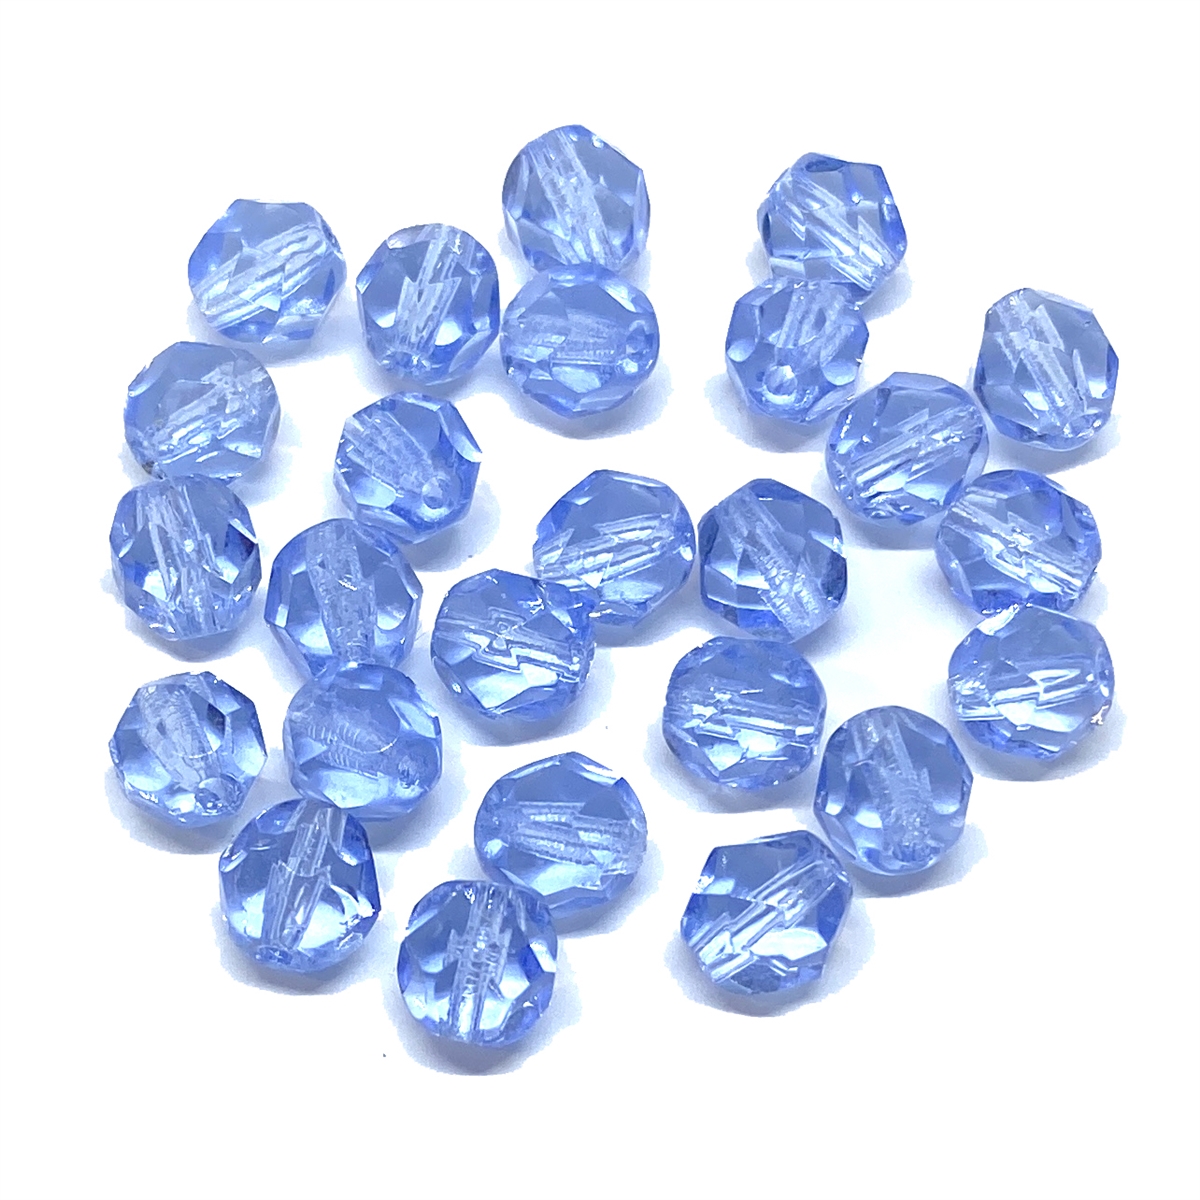 Czech Fire Polished Glass Beads 8mm Round Full Pearlized - Navy Blue (25)